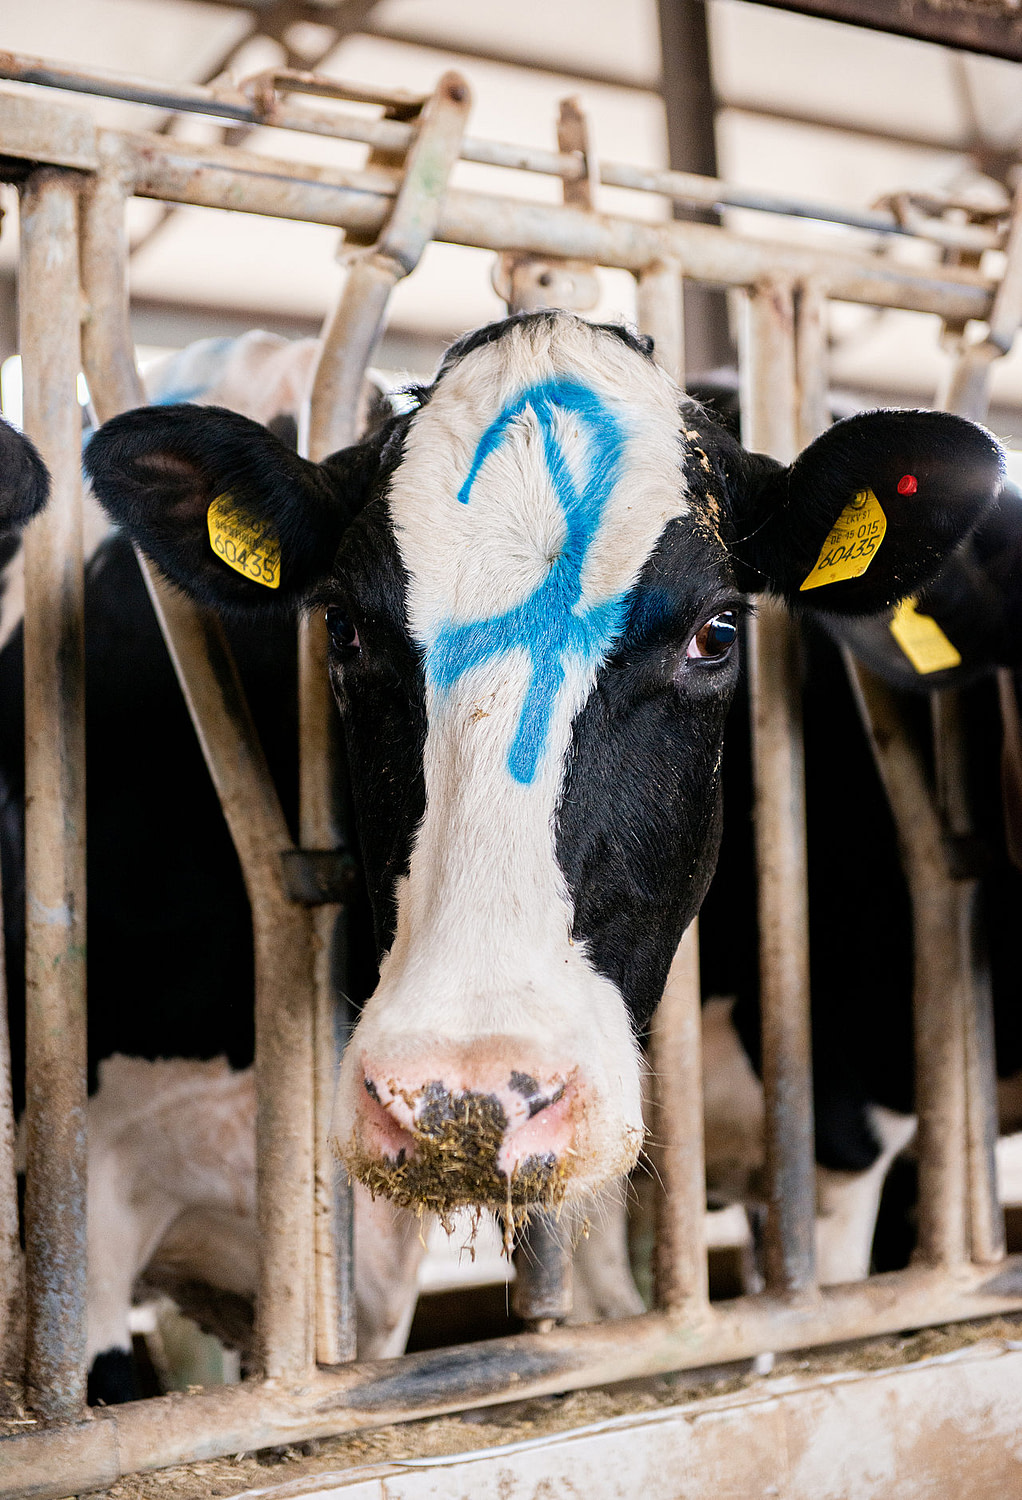 A dairy cow with a blue number "7" painted on the front of her face makes eye contact at a dairy farm in Turkiye. Individual cows on dairy farms are identified only by ear tags and other markings painted onto their bodies.